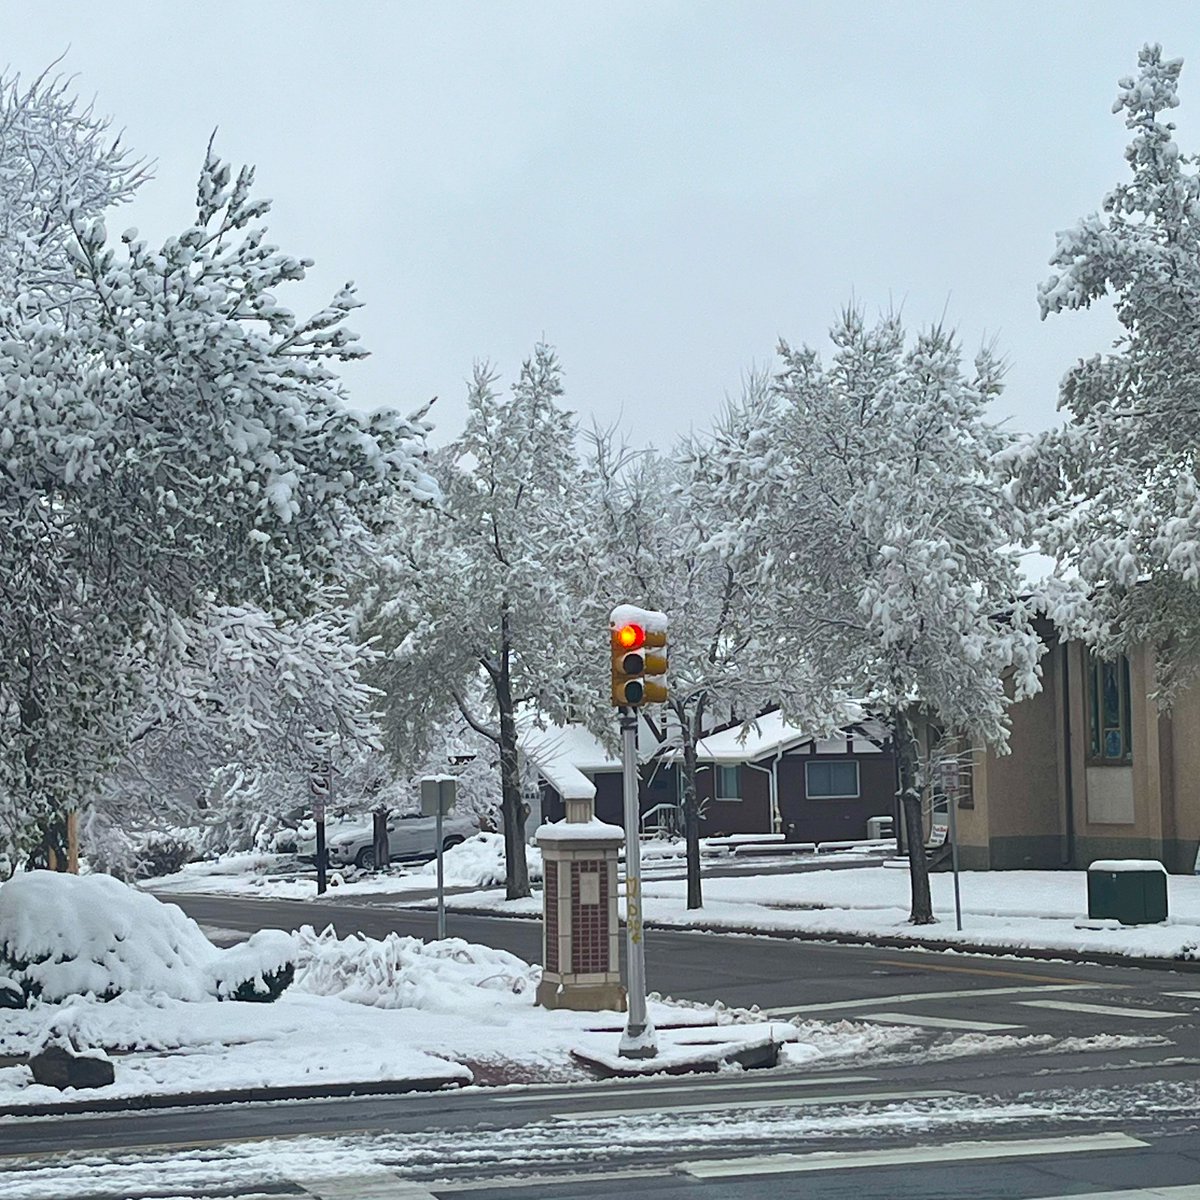 Denver street corner early this morning. We got 4-6' of snow, maybe the last spring snow this year. #Colorado